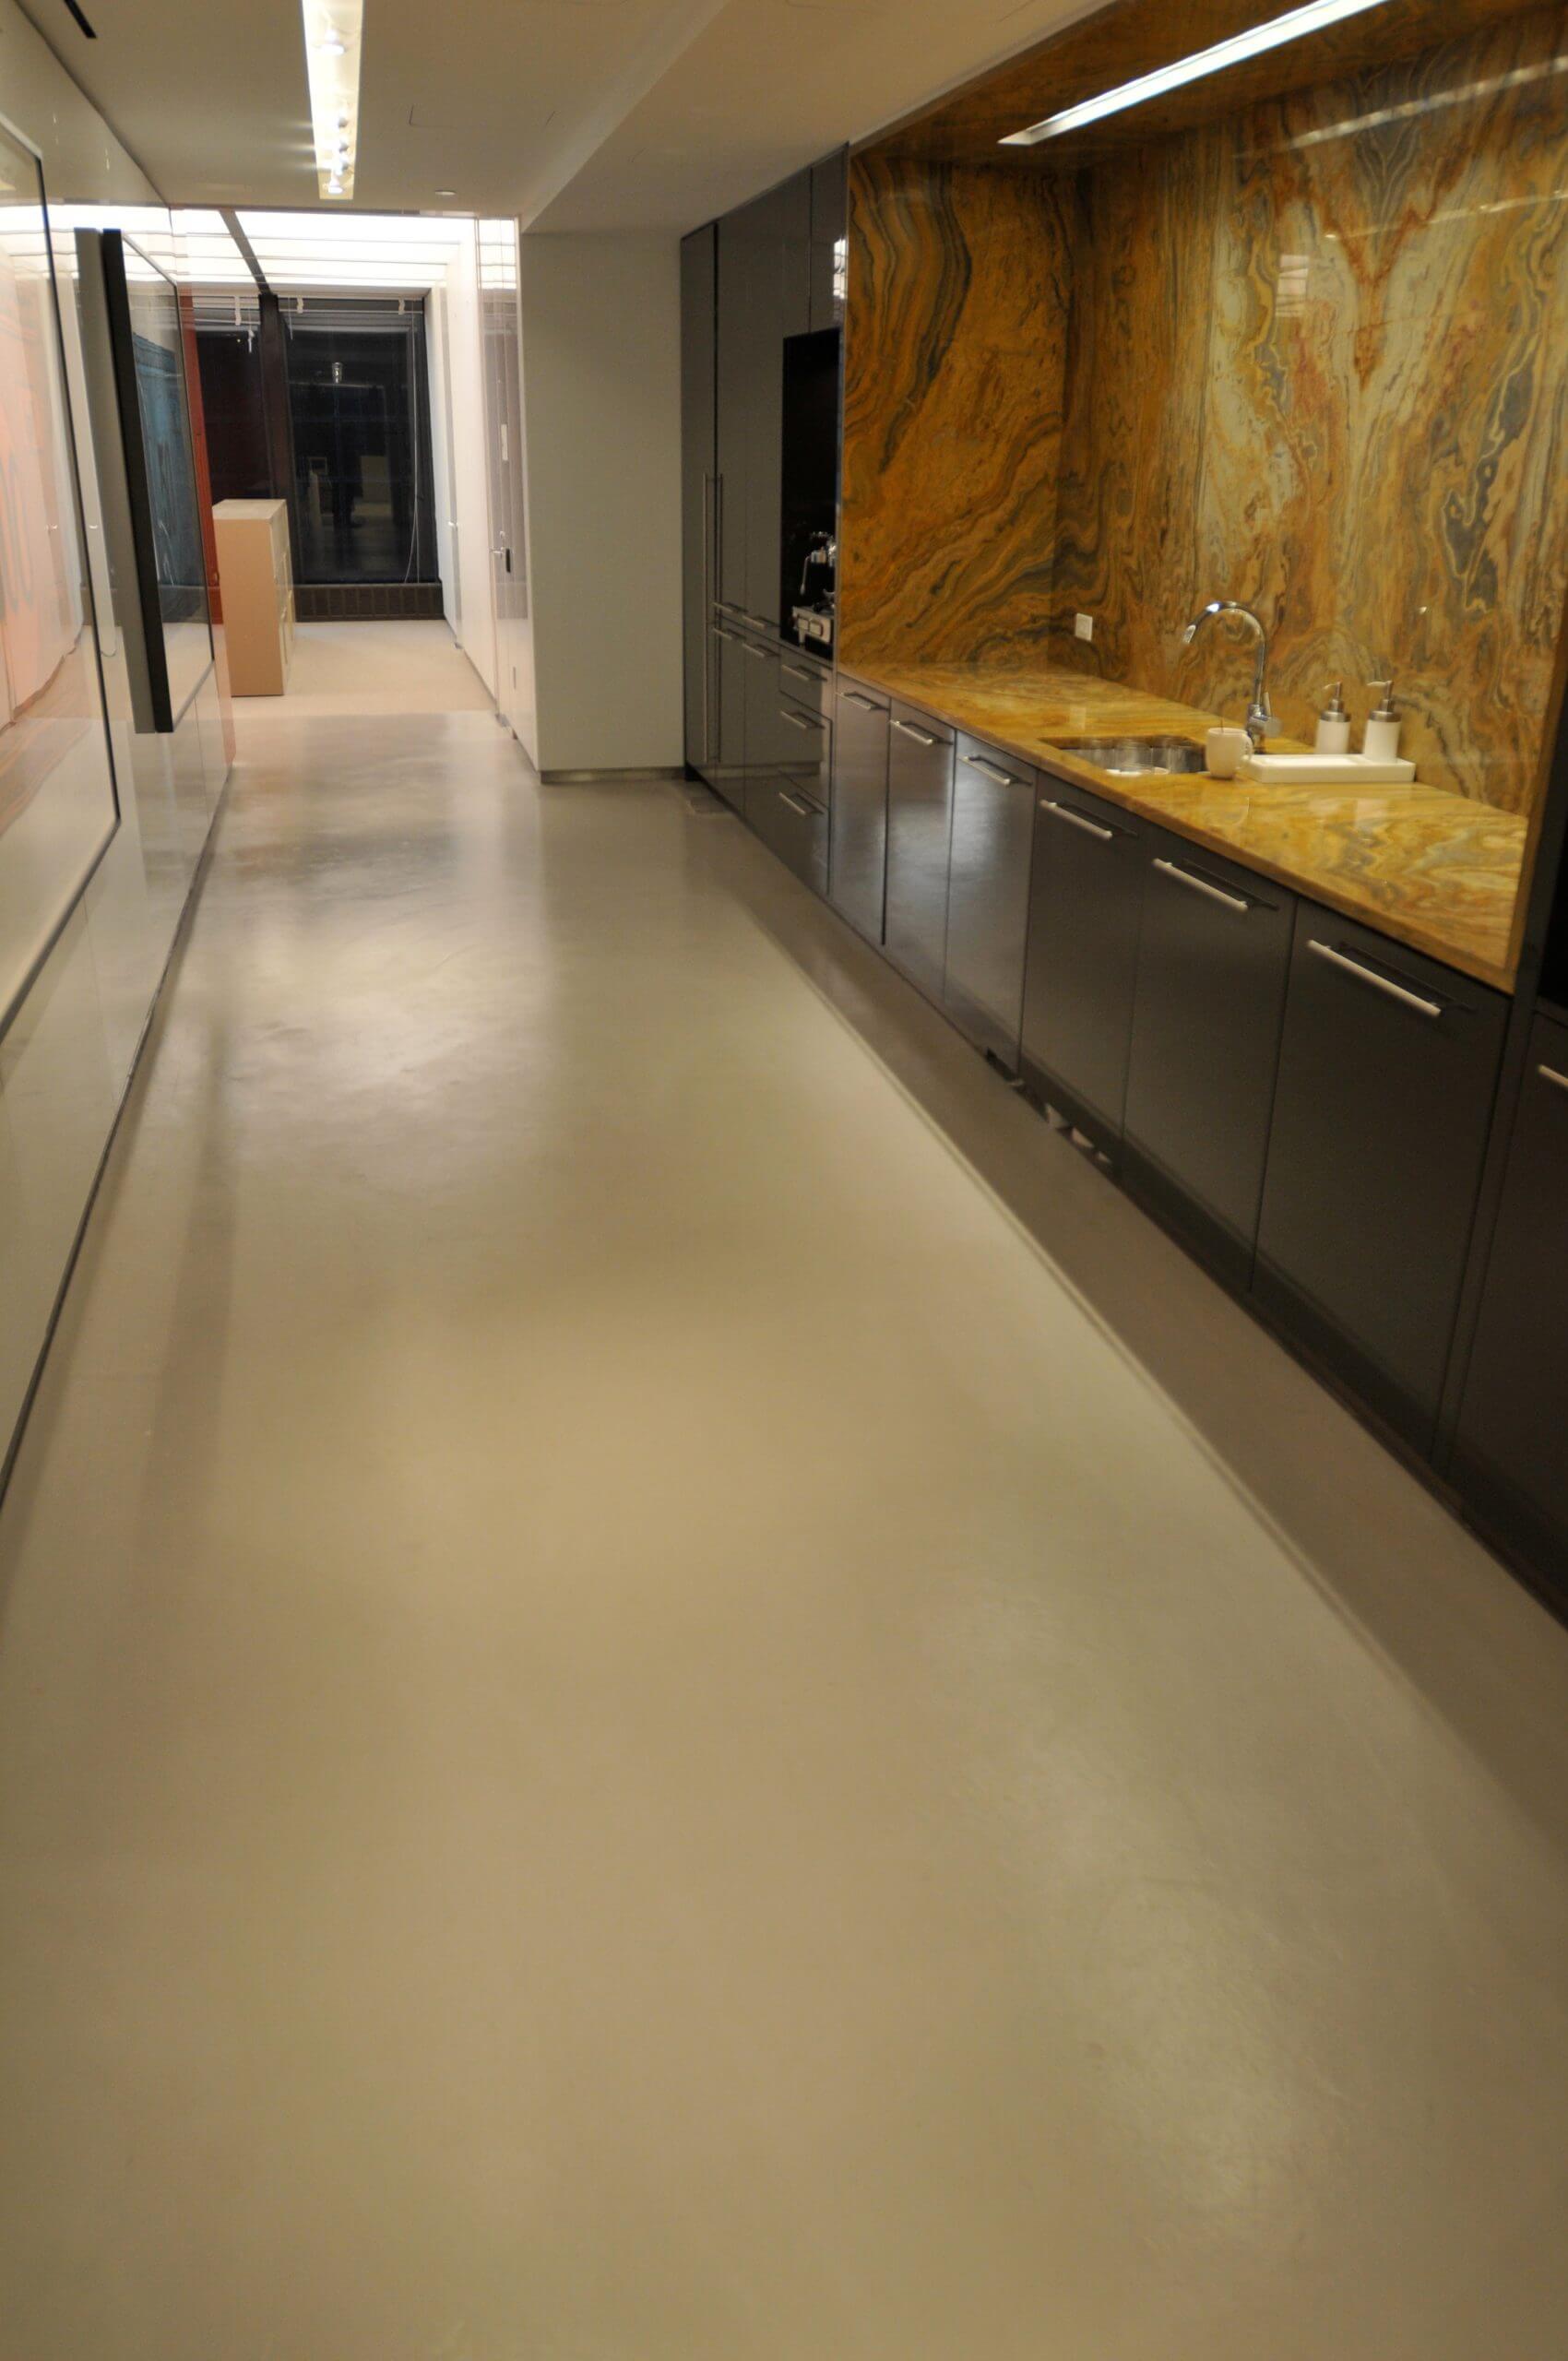 Self leveling Concrete Floors in Offices Spaces Brentwood TN | Duraamen Engineered Products Inc